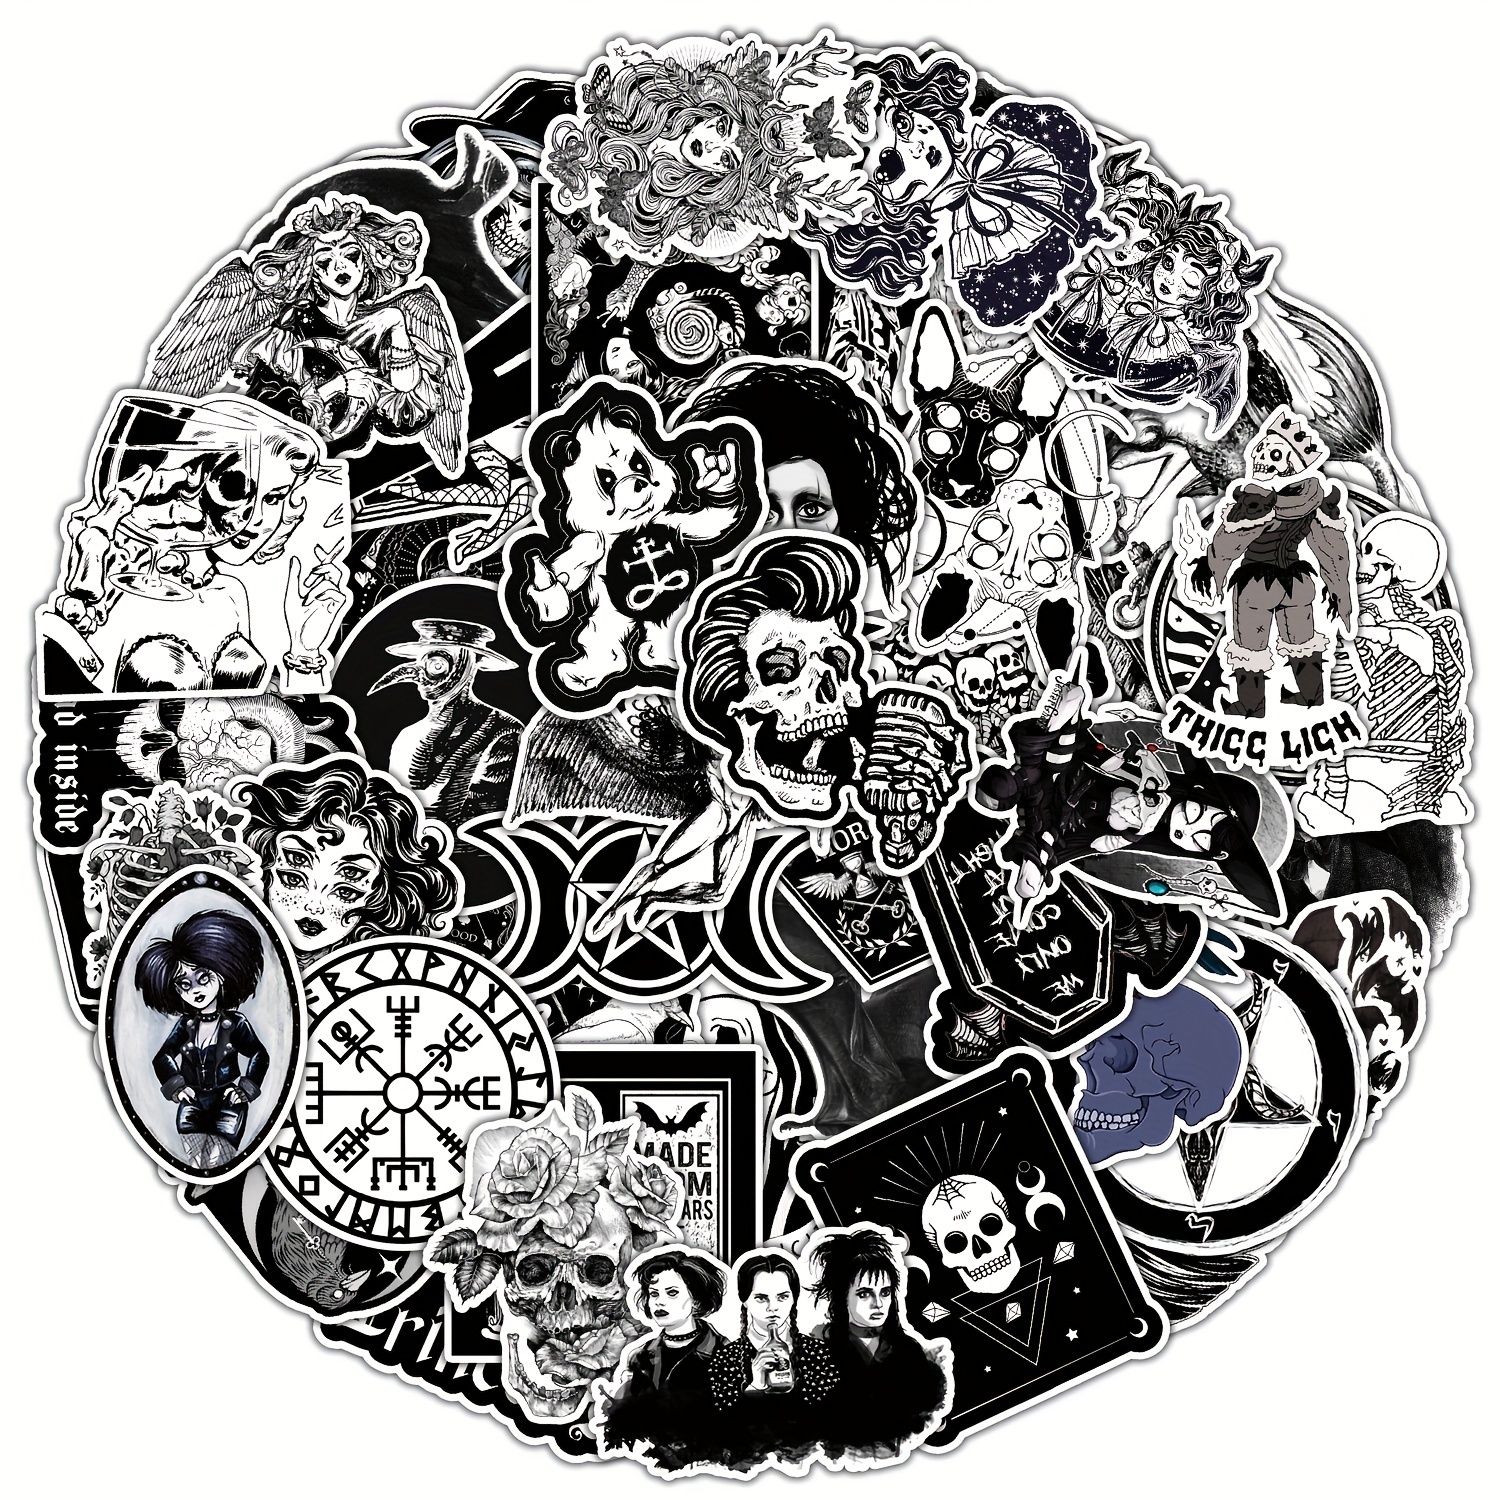  Gothic Stickers, 50 Pcs Goth Vinyl Sticker Pack, Waterproof  Skeleton Stickers for Laptops, Water Bottles, Phone Case, Skull Stickers  Decals for Teens and Adults : Electronics